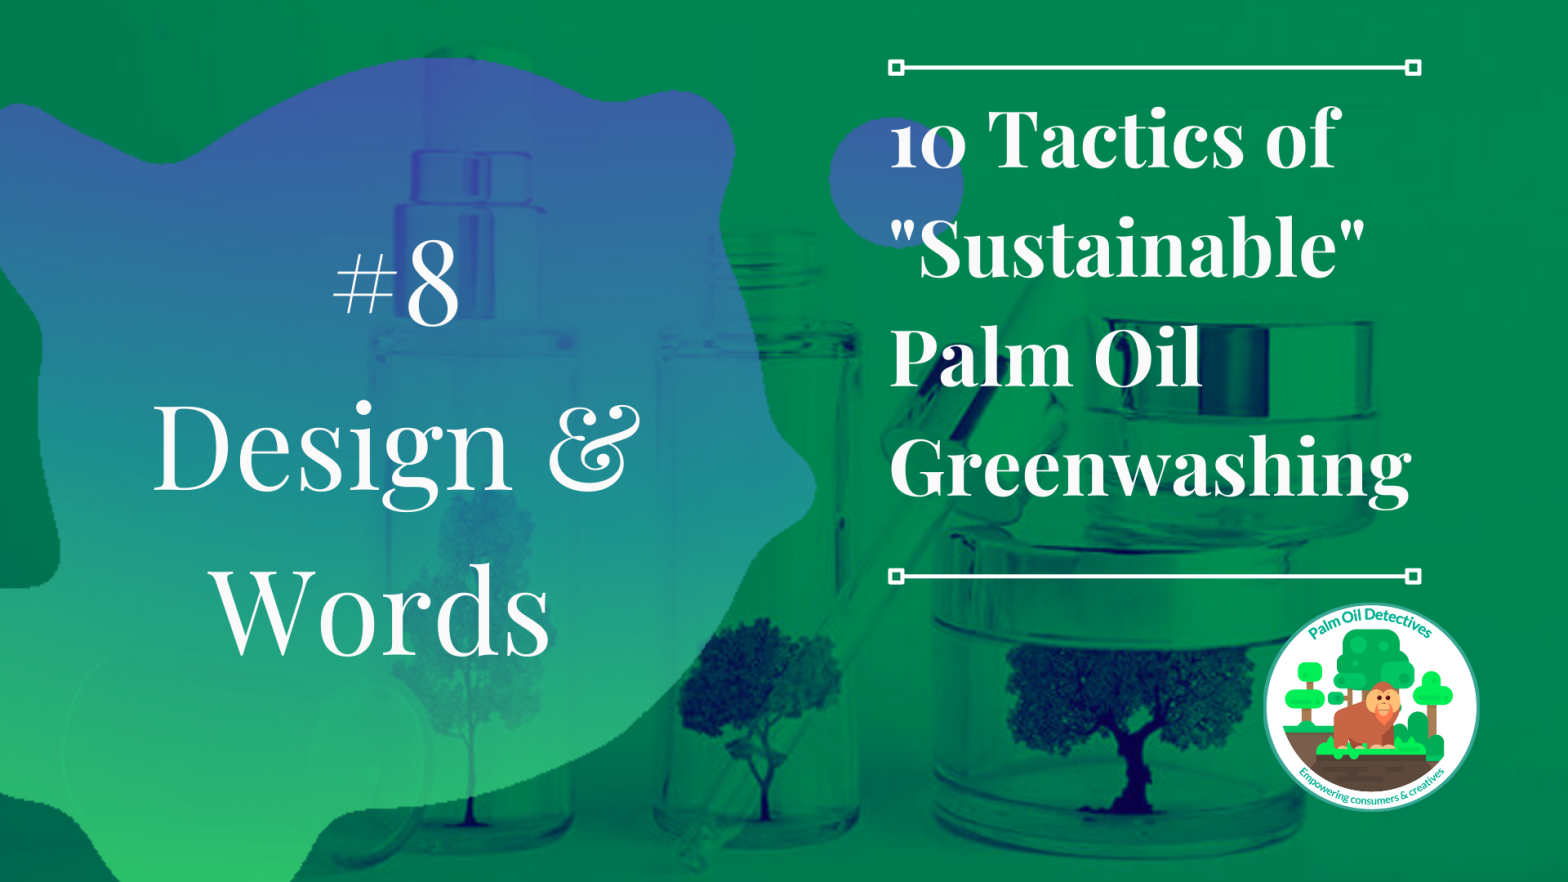 10 Tactics of Sustainable Palm Oil Greenwashing - Tactic 8 Design and Words